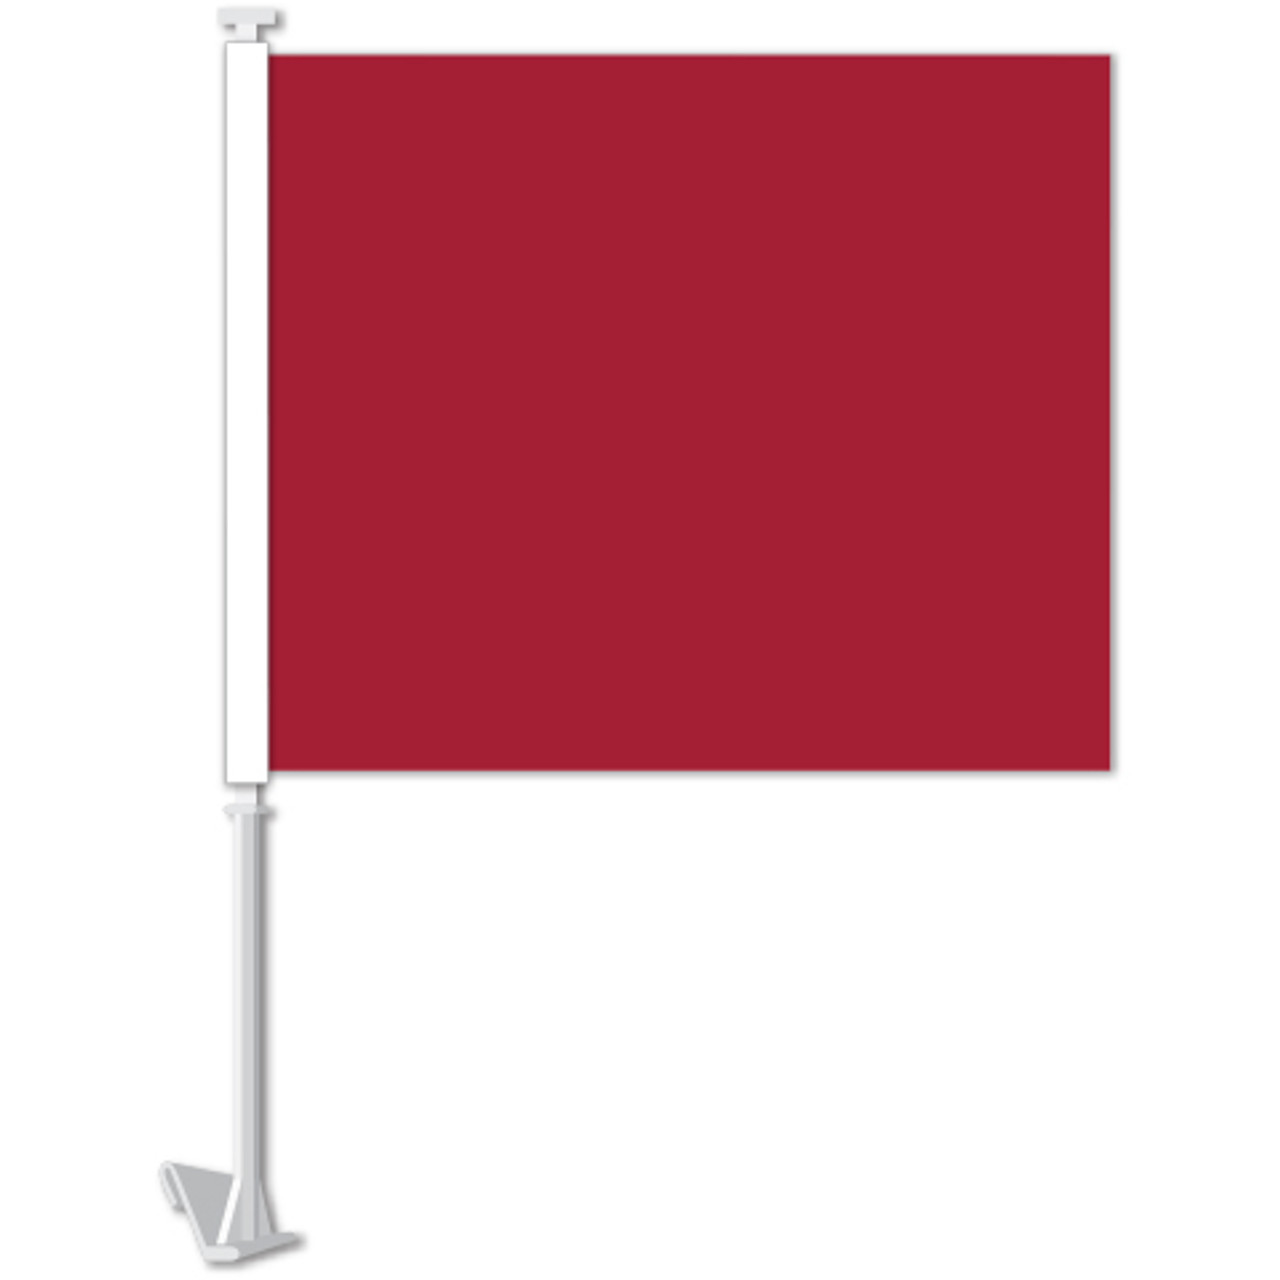 Clip-On Window Flags 11" x13" (#4780) red